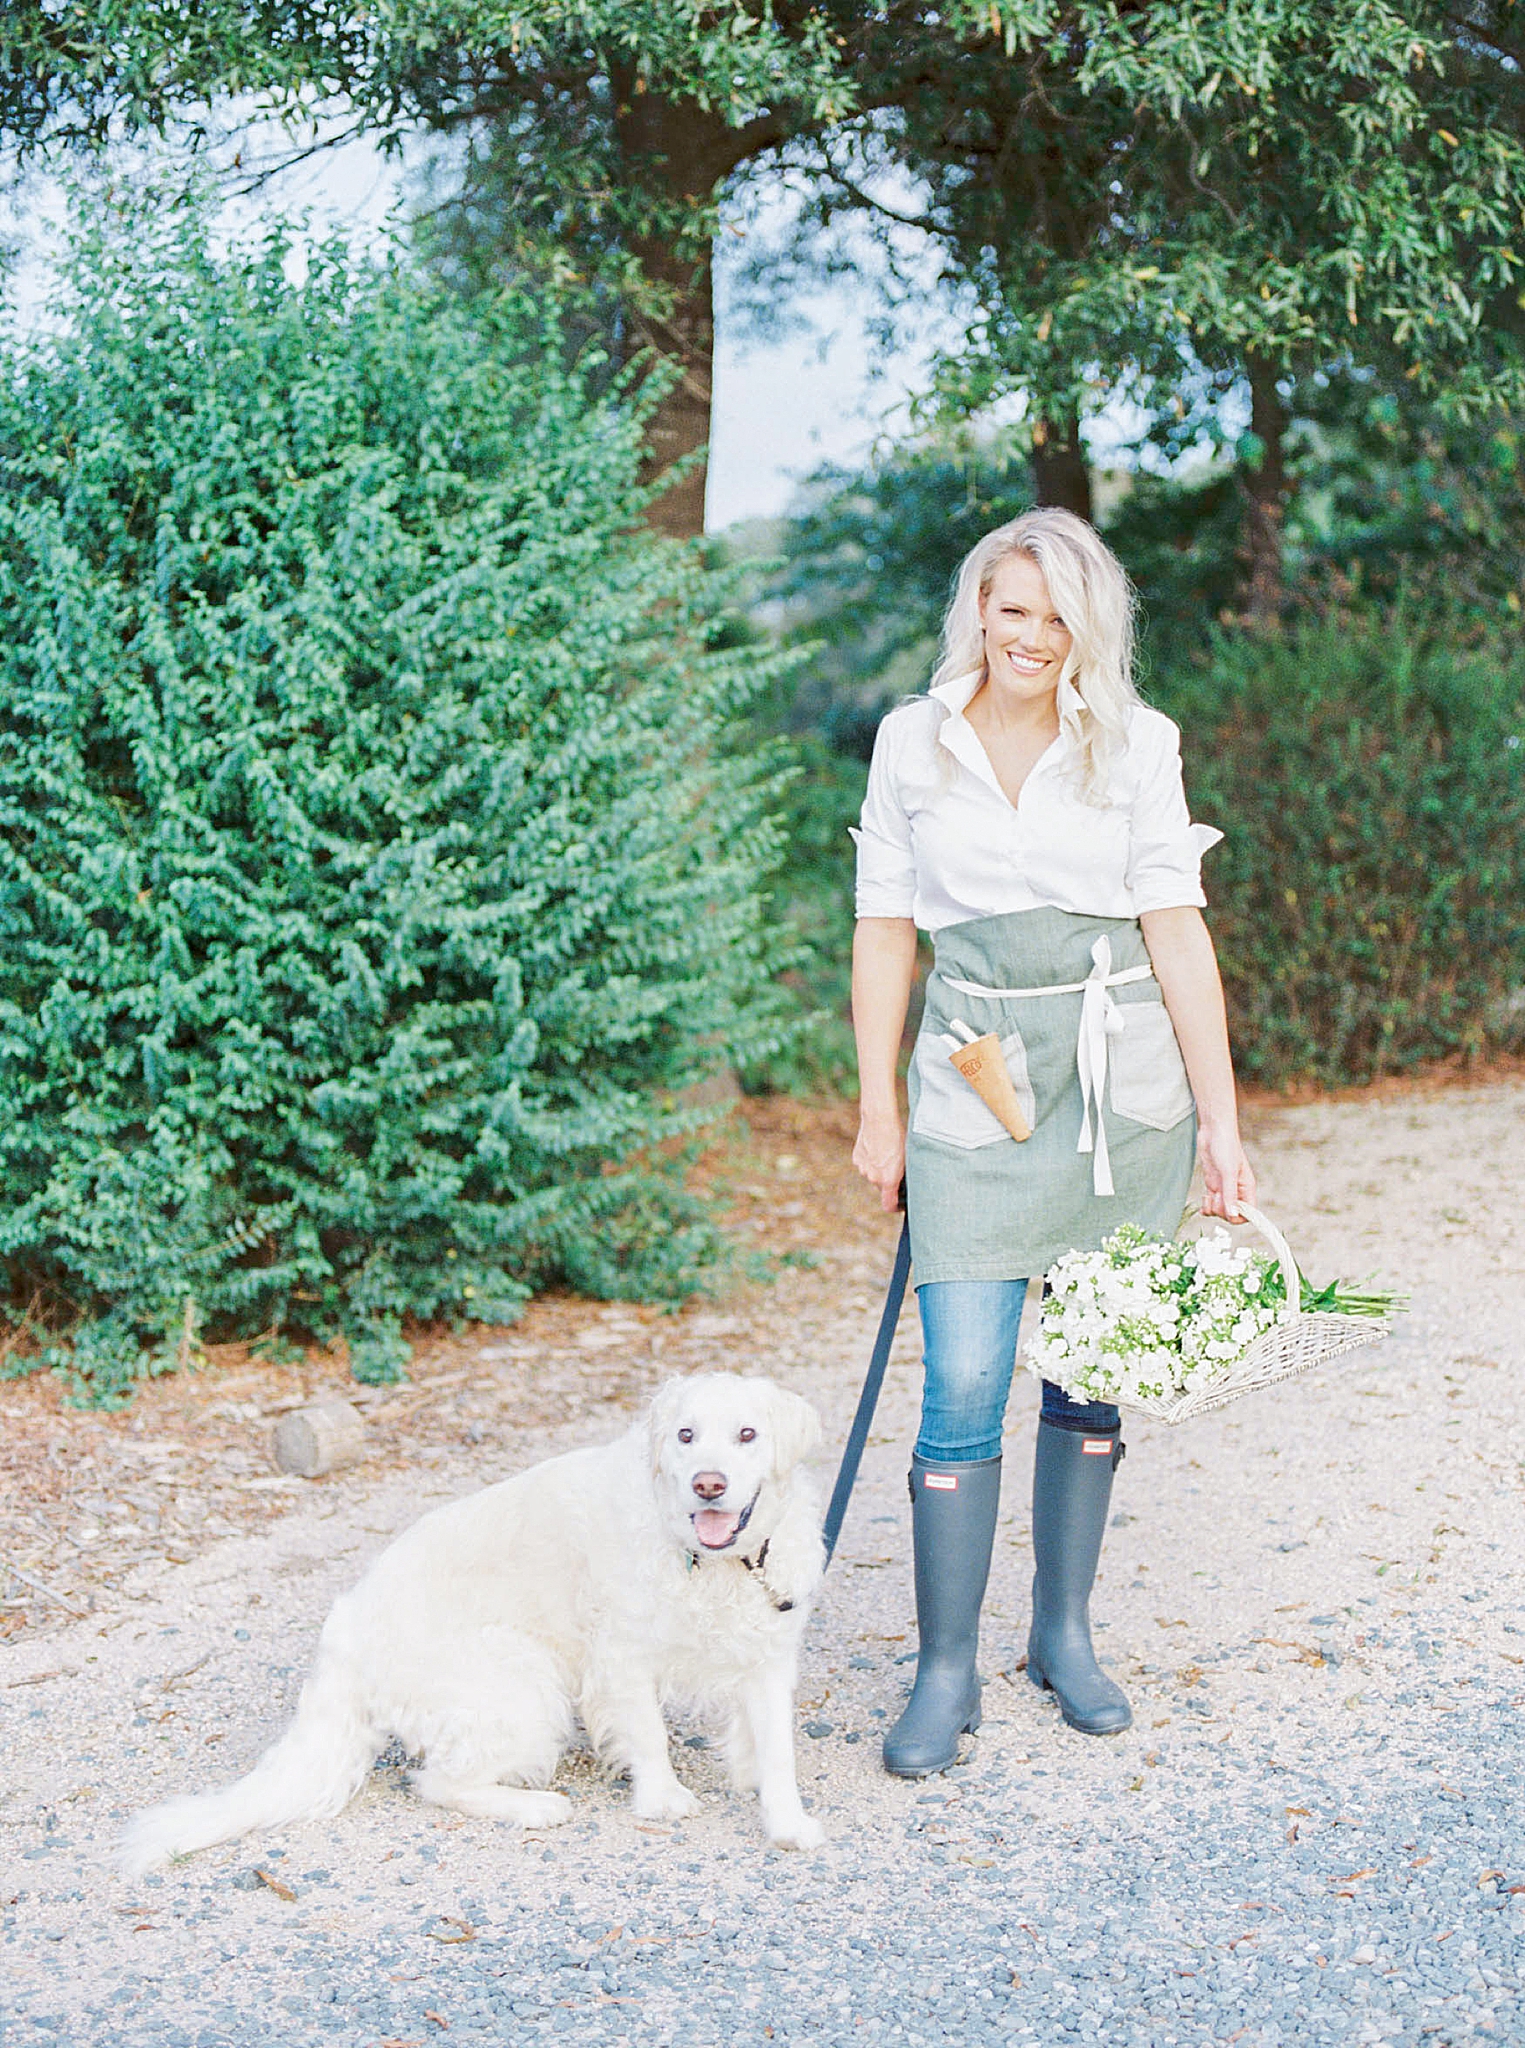 Charlotte florist Darling Dogwood Floral poses with dog by bush at Morning Glory Farm